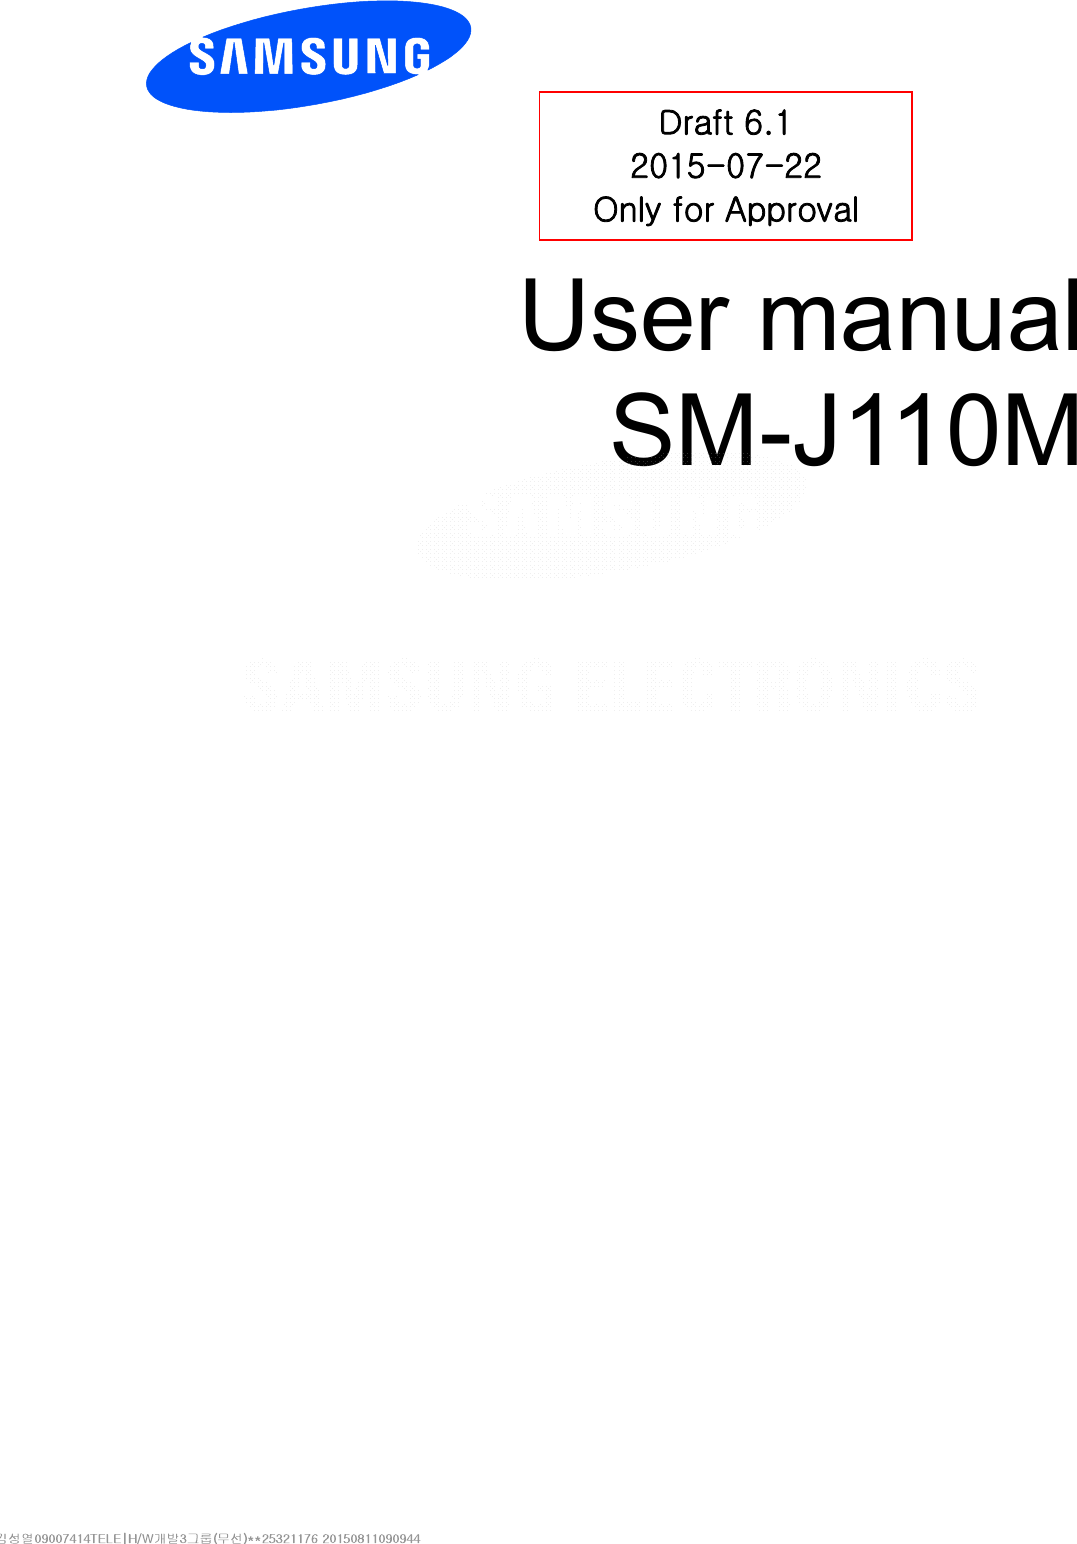         User manual SM-J110M           Draft 6.1 2015-07-22 Only for Approval 